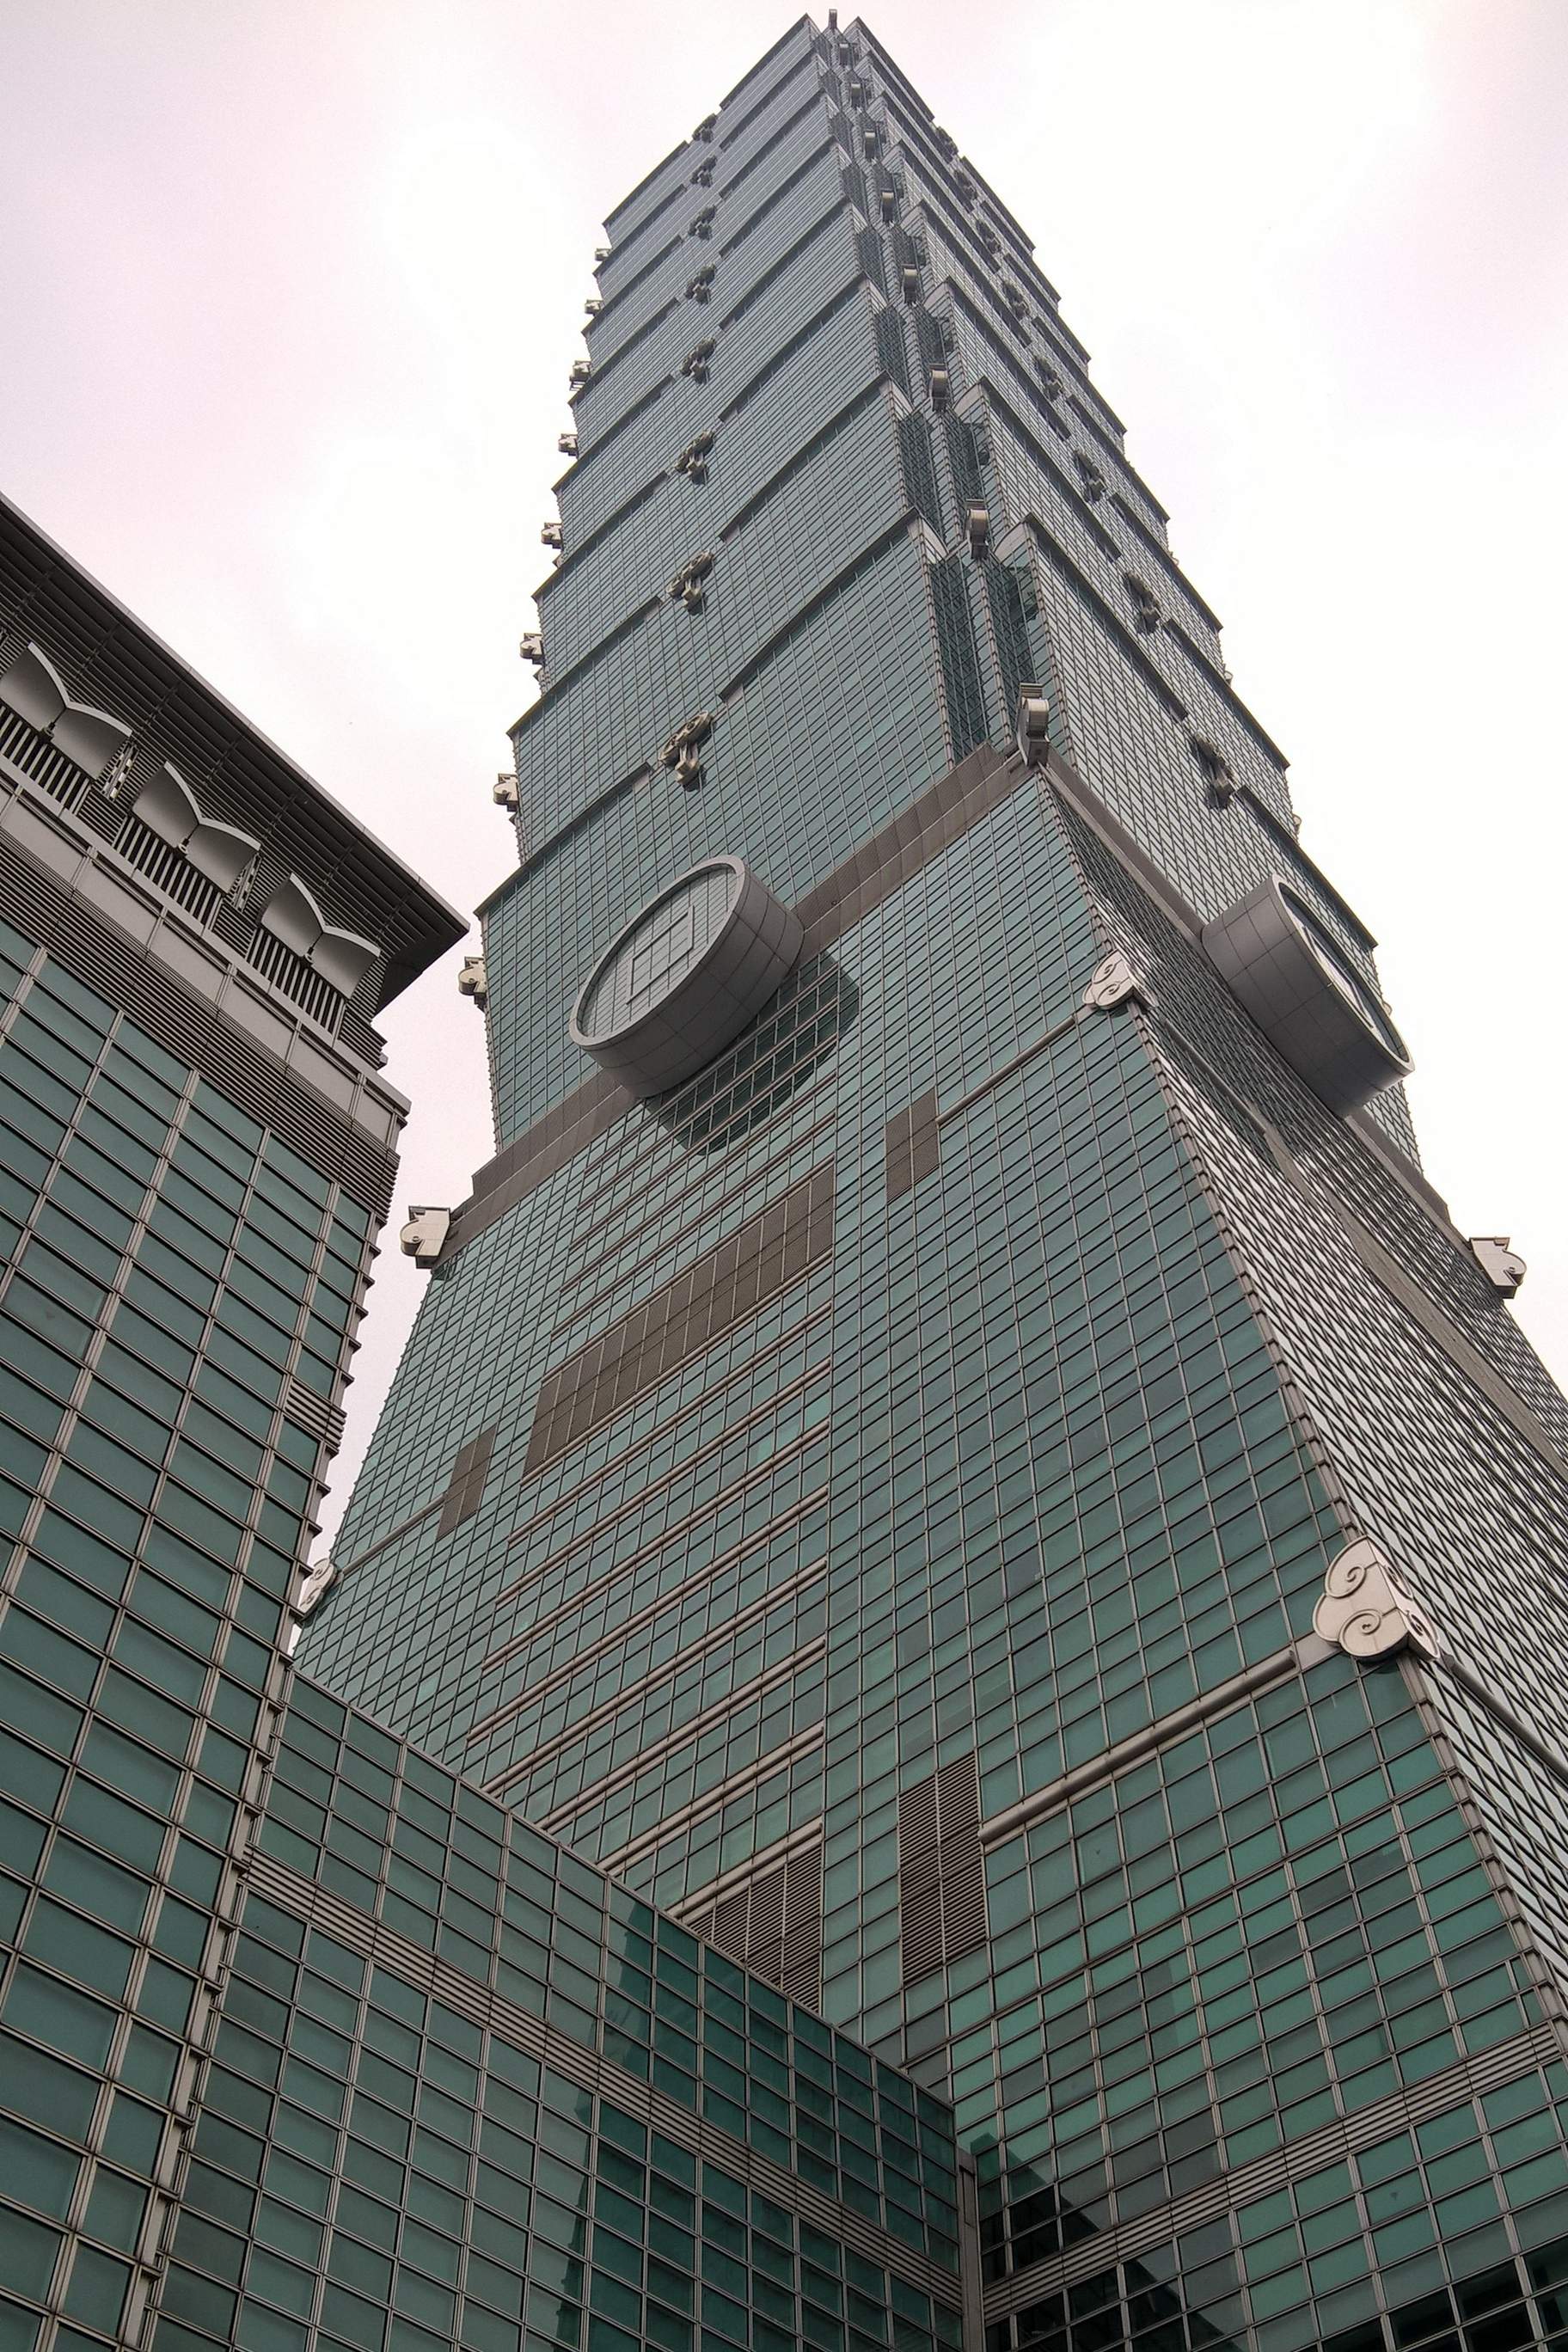 The Taipei 101 was the world's tallest building from 2004-2009.